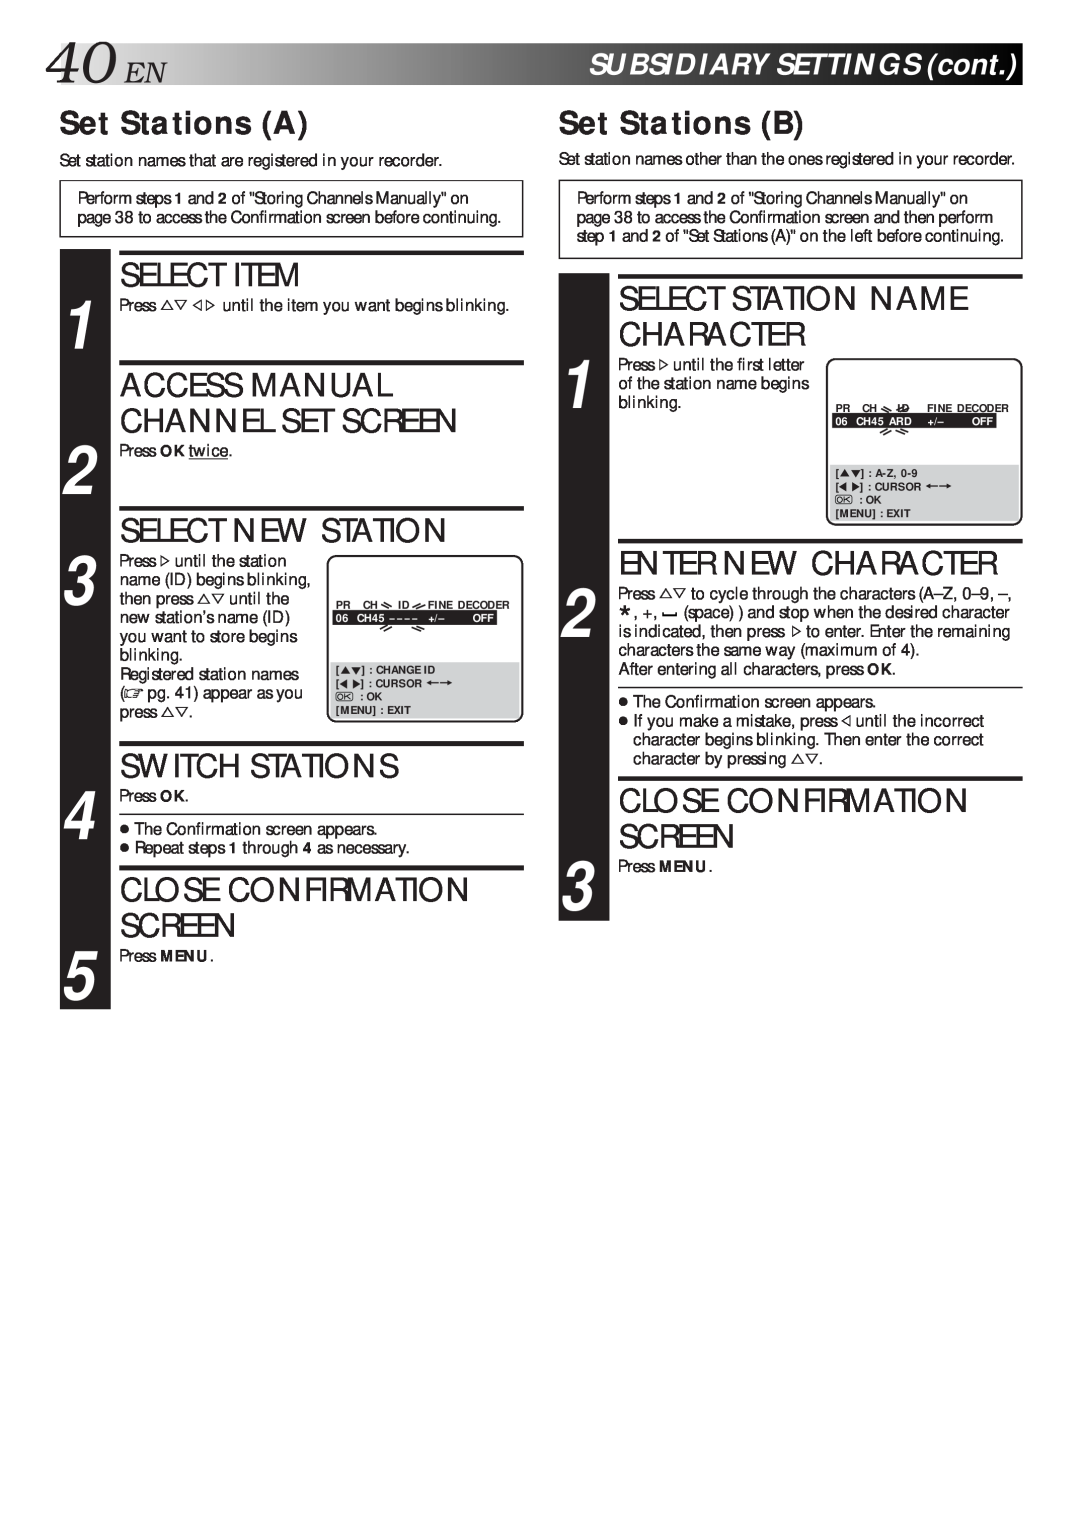 JVC HR-J712EU Access Manual, Channel Set Screen, Select New Station, Switch Stations, Select Station Name Character 